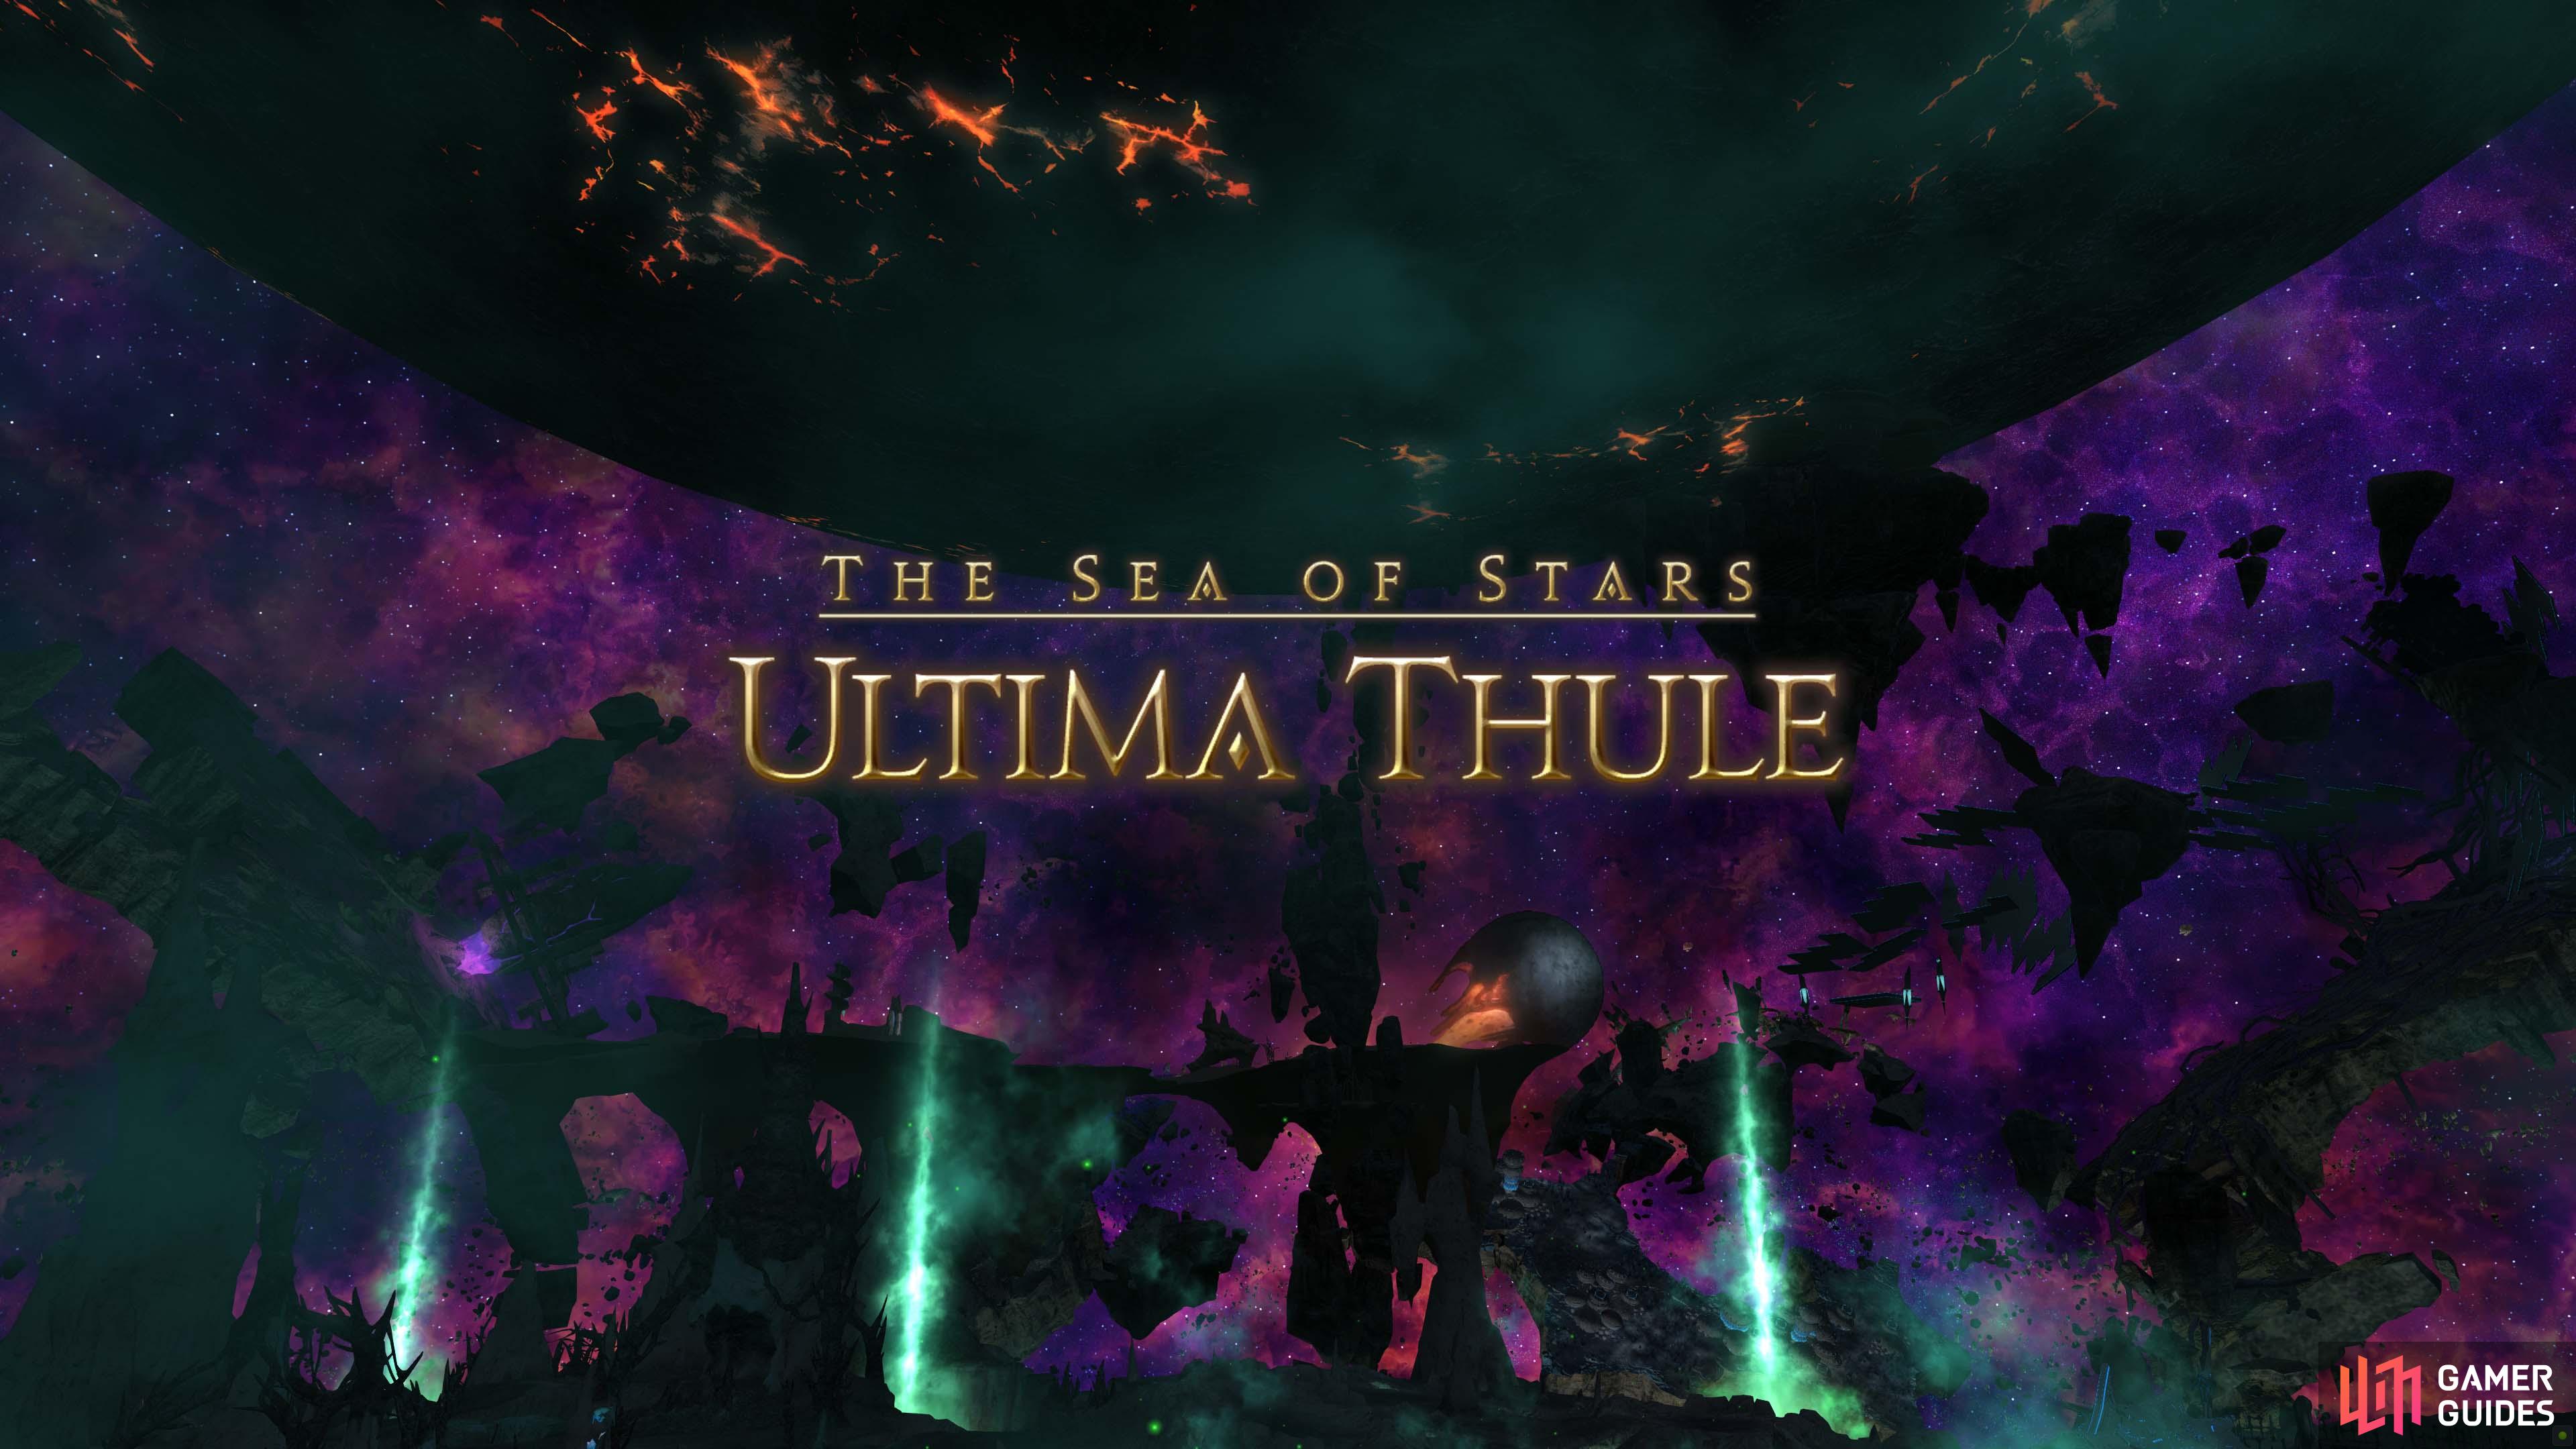 The Sear of Starts - Ultima Thule